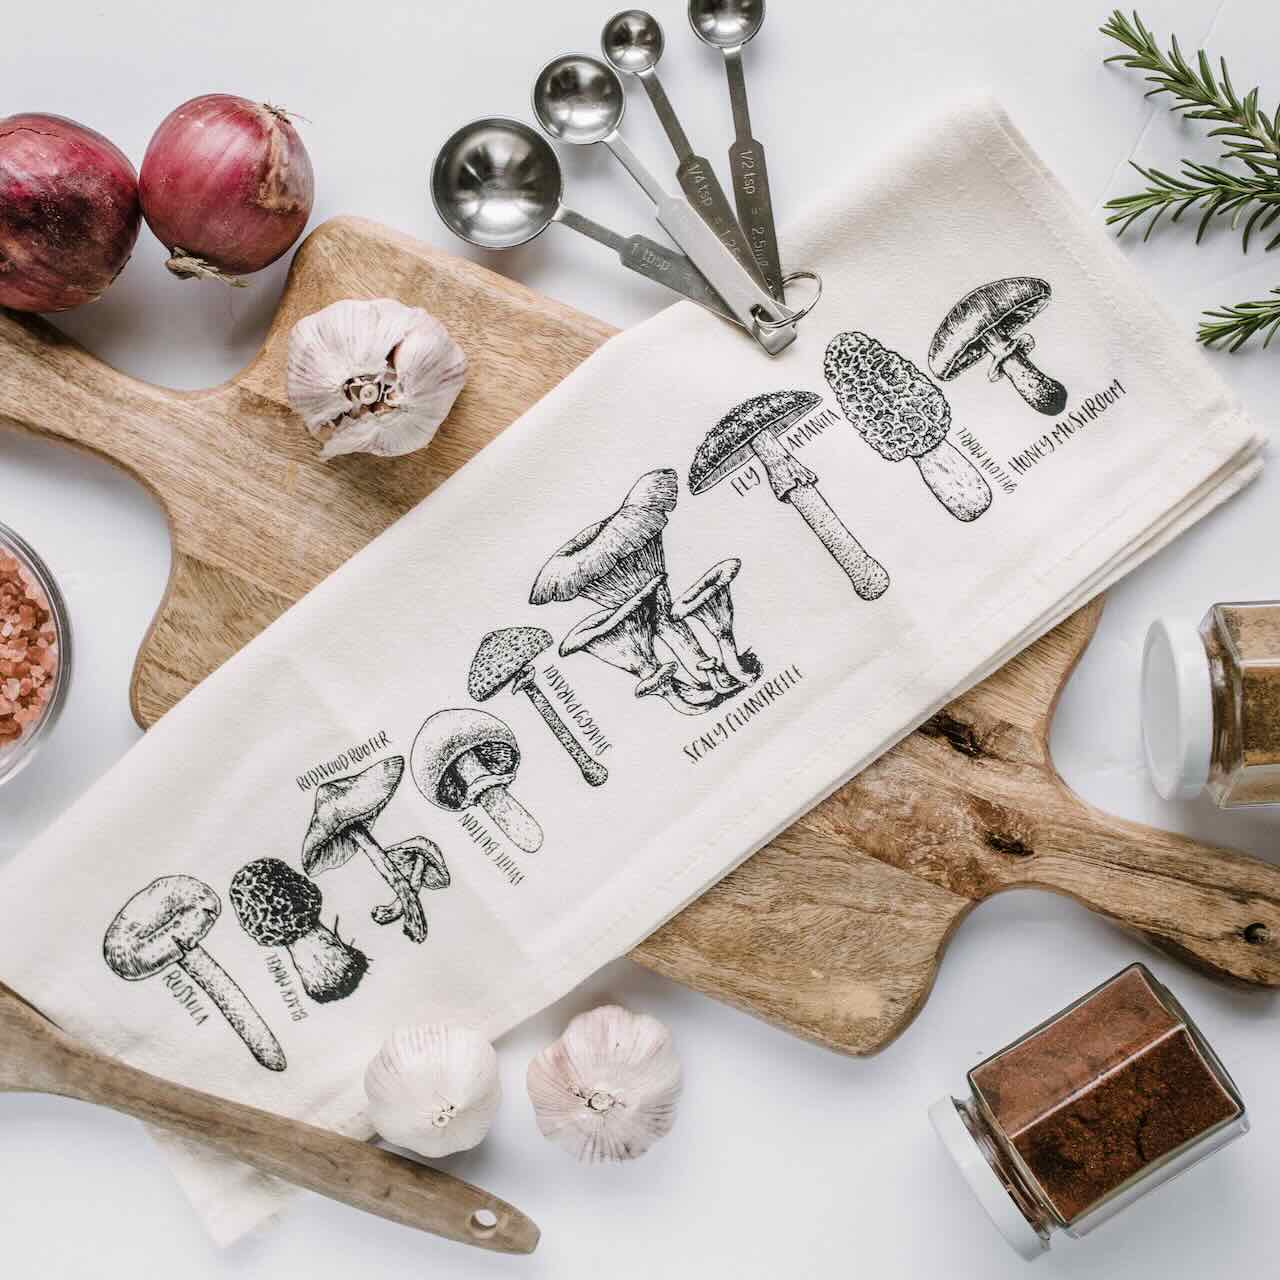 A white kitchen tea towel with 9 different mushroom types printed, laying casually on top of a wooden chopping board, with onions, garlic, and some spices in  bottle as decorating items.